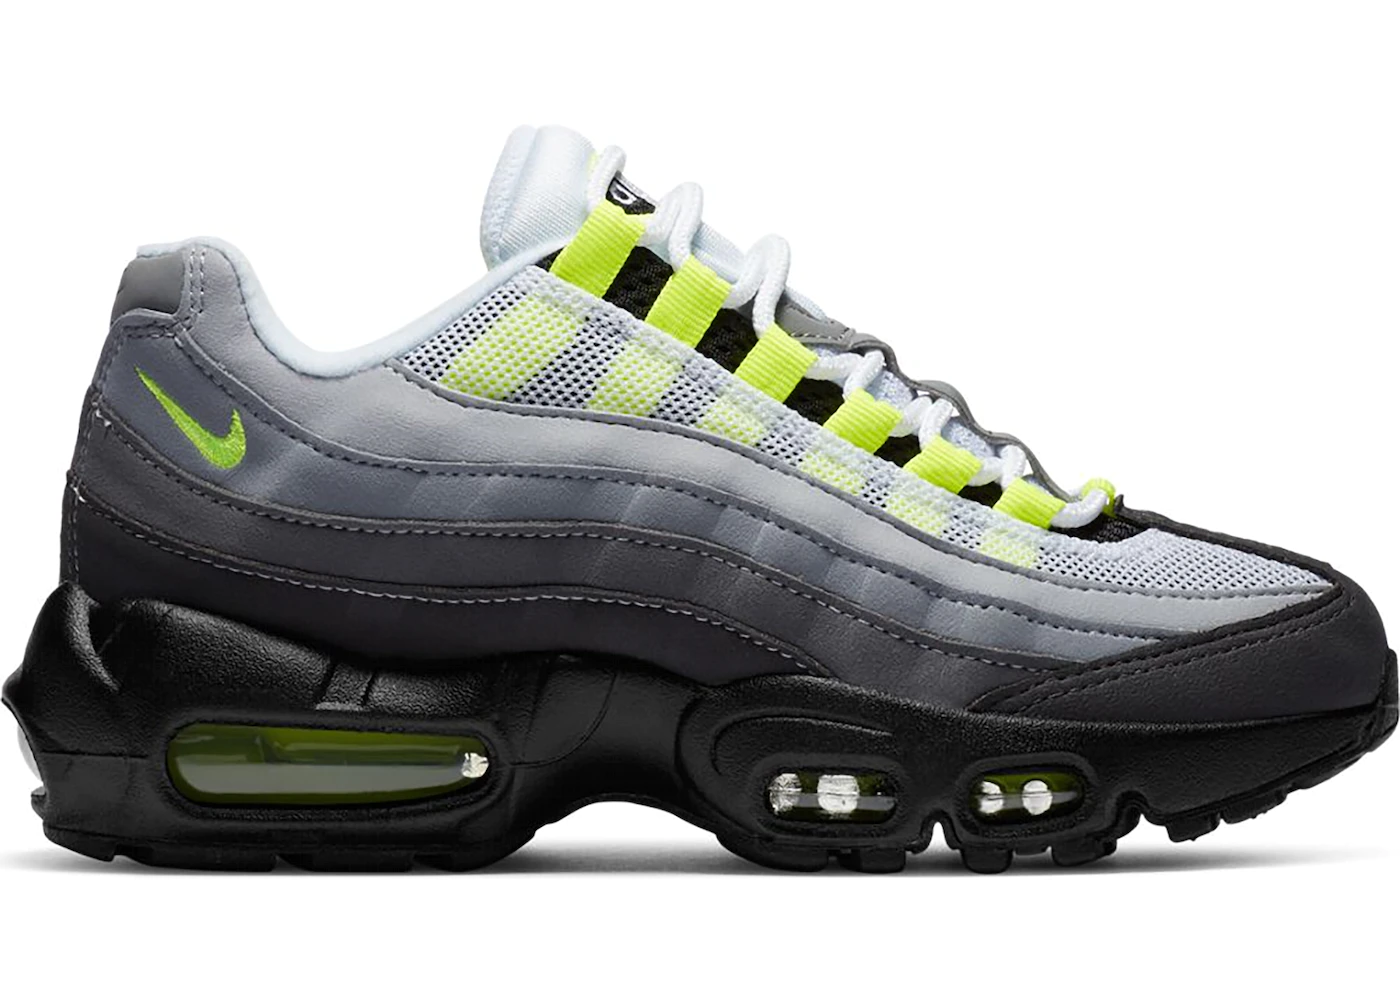 Comparable poor in case Nike Air Max 95 OG Neon (2020) (GS) - CZ0910-001 - US